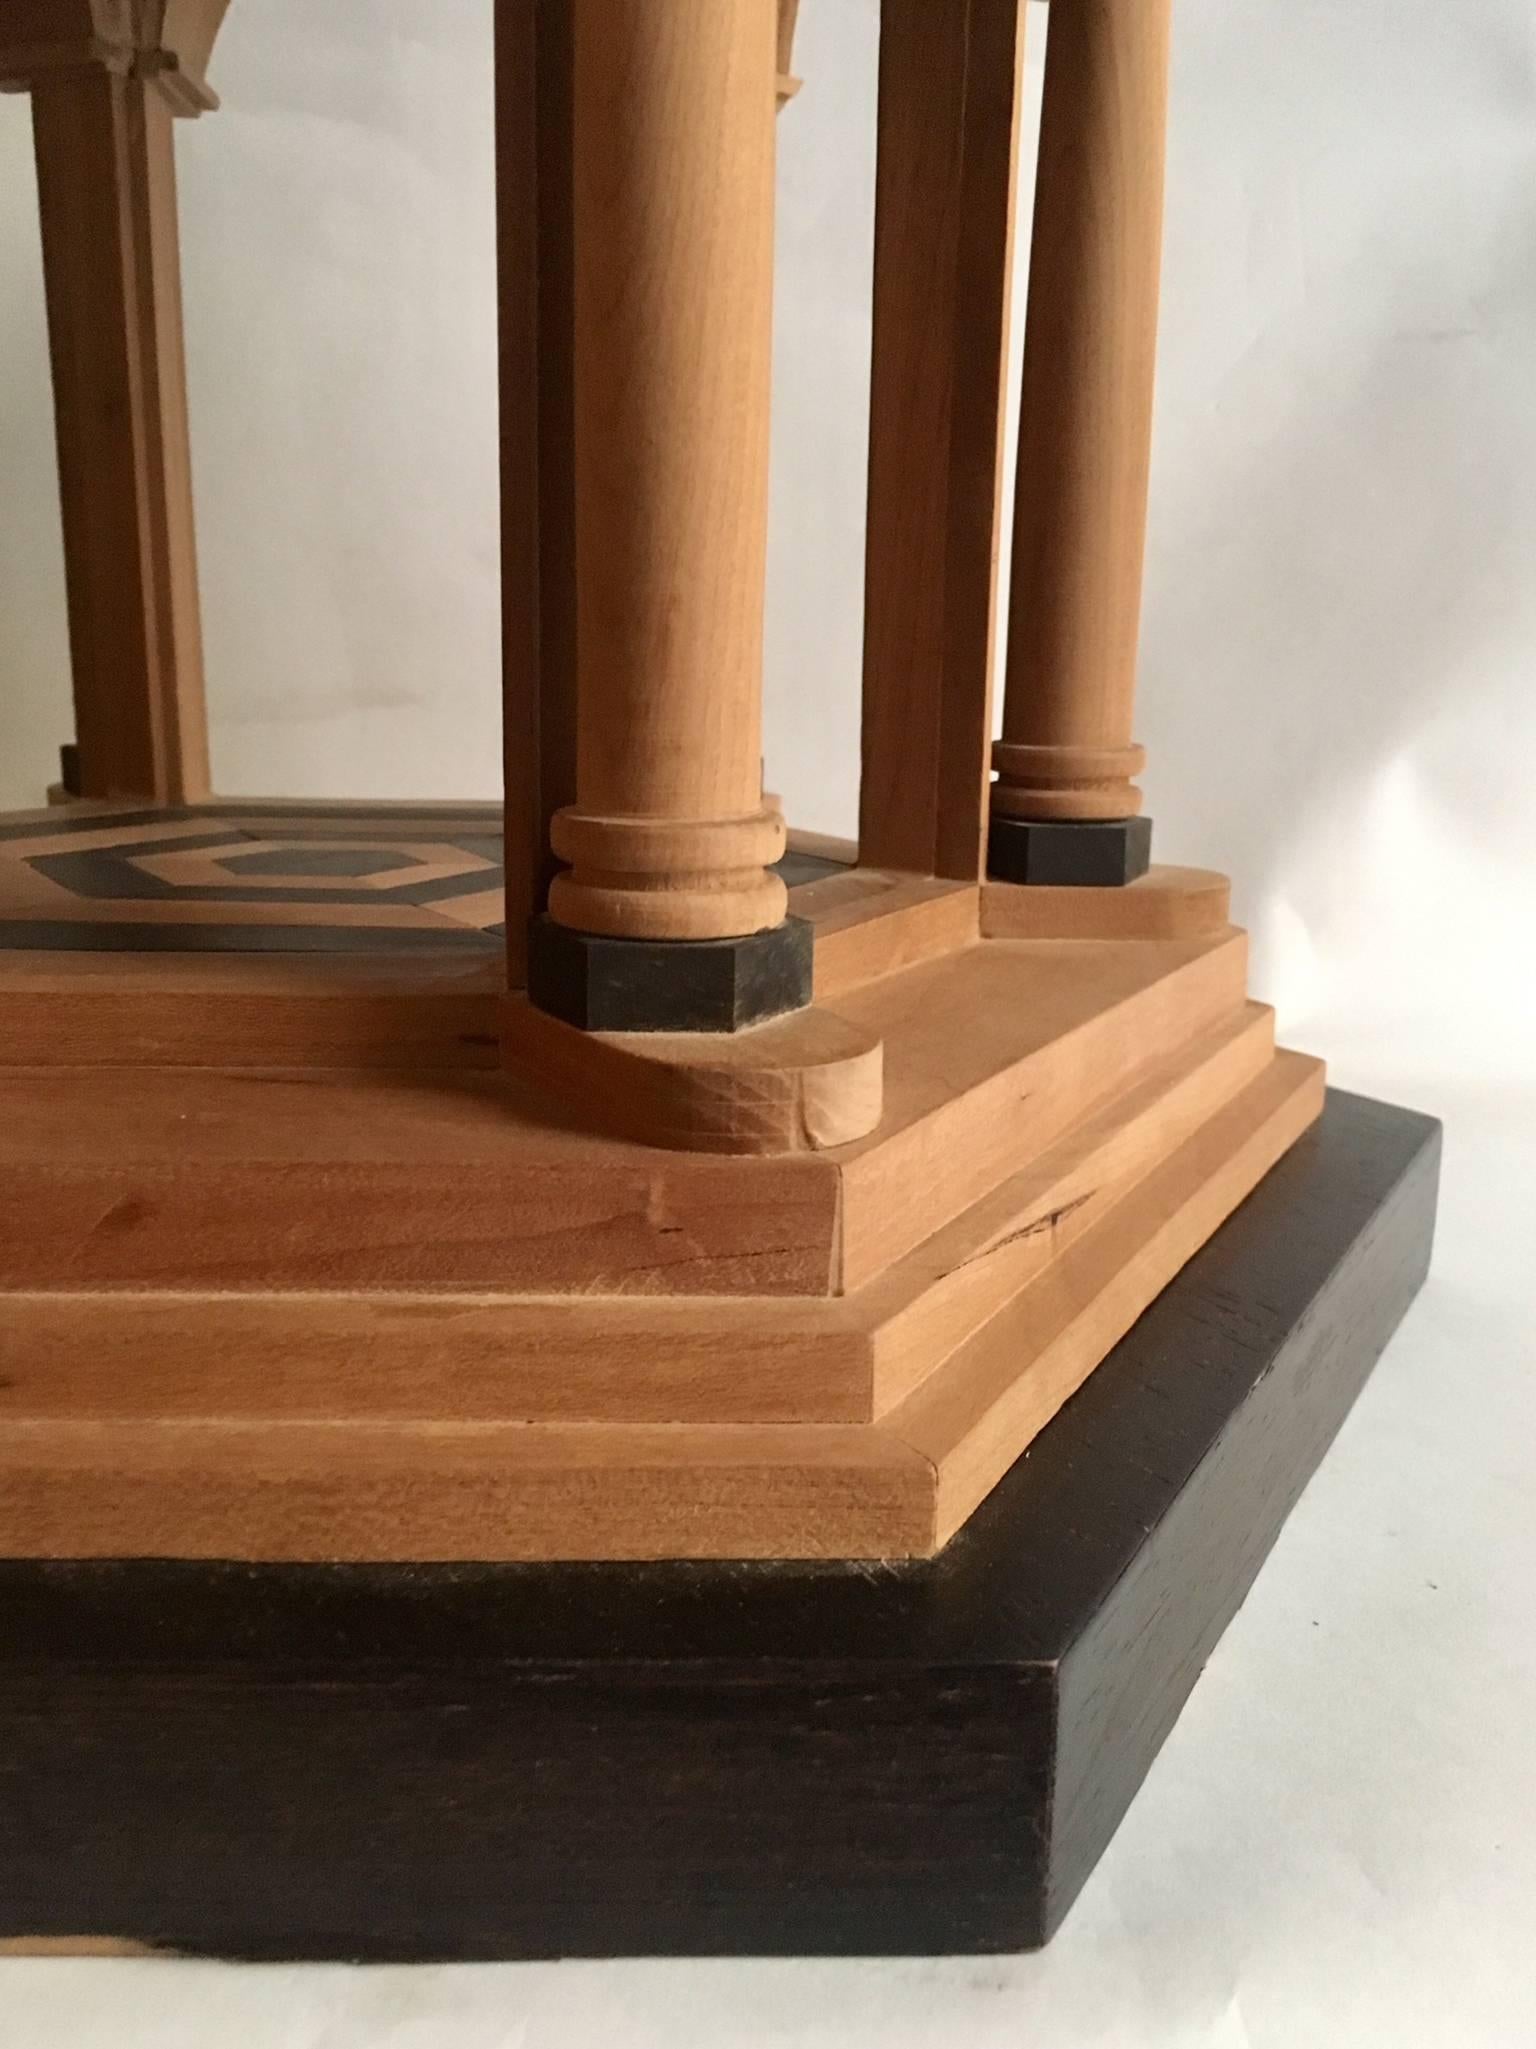 Neoclassical Revival 21th Century Wooden Neoclassical Architectural Model